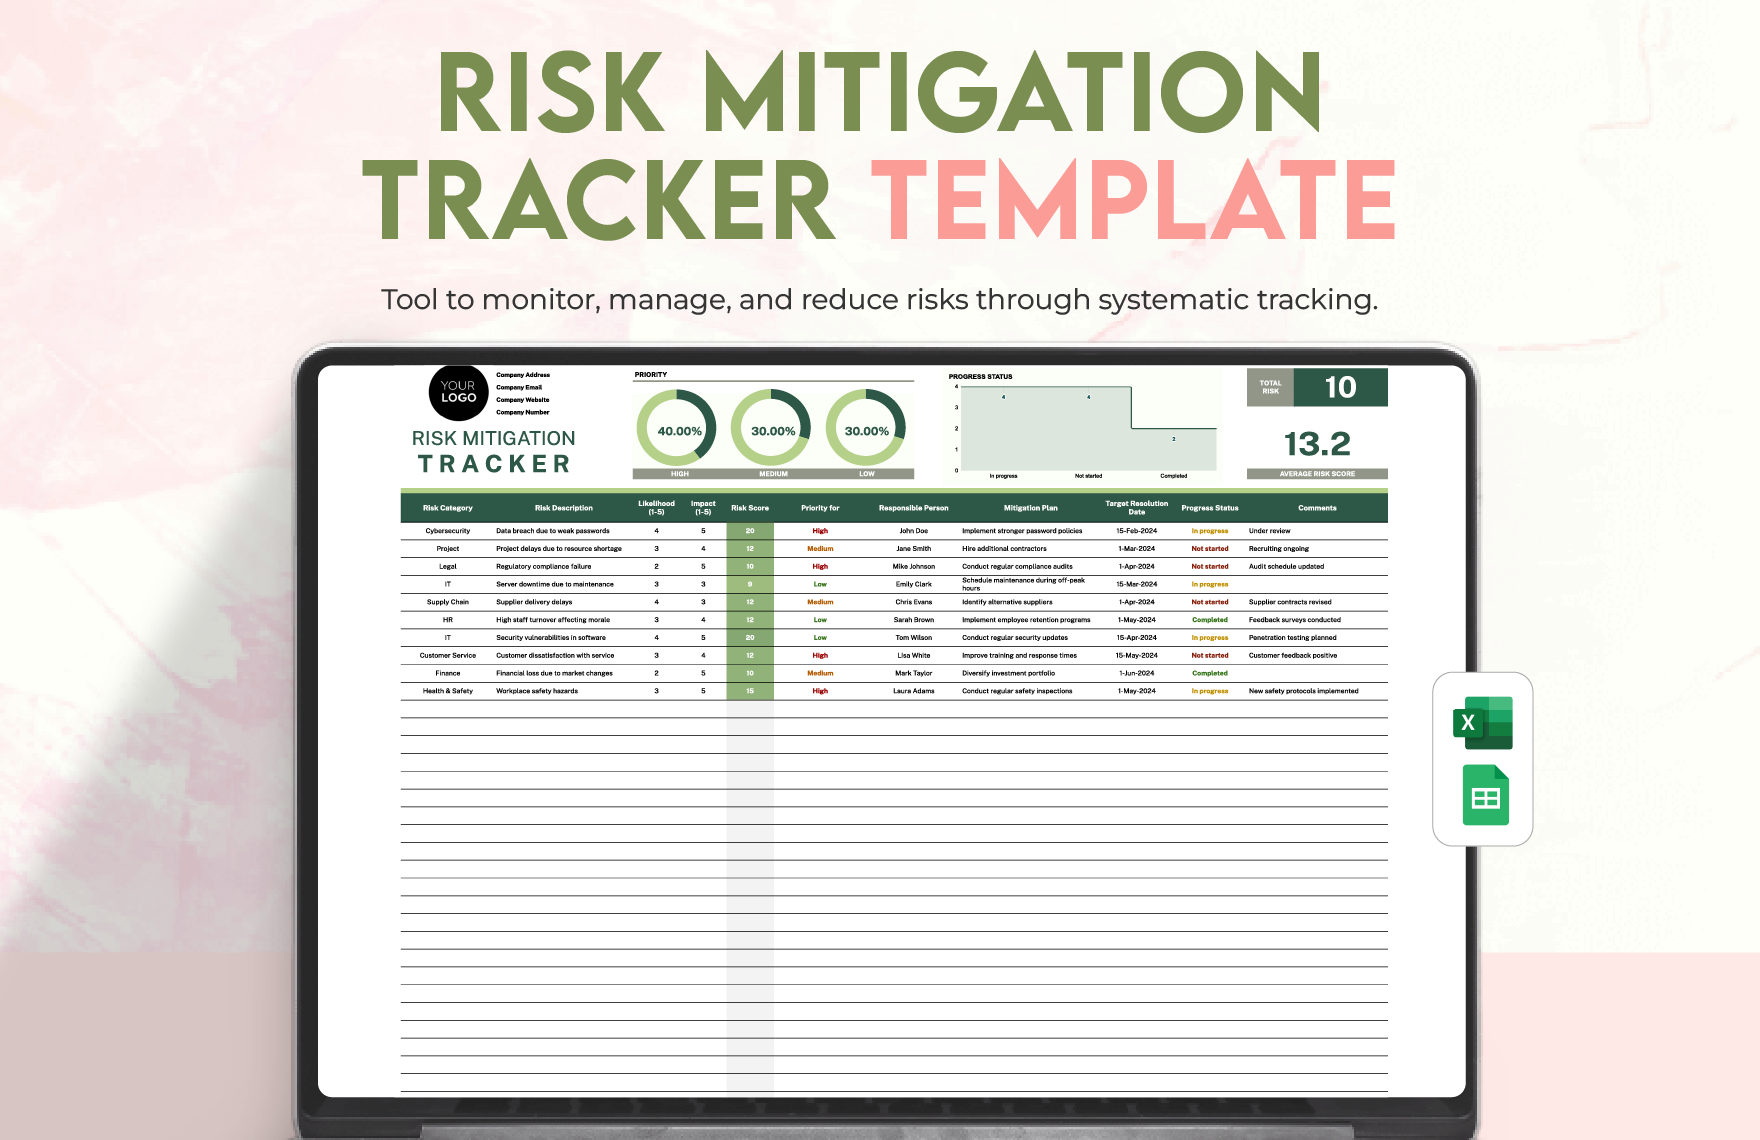 Risk Mitigation Tracker Template in Excel, Google Sheets